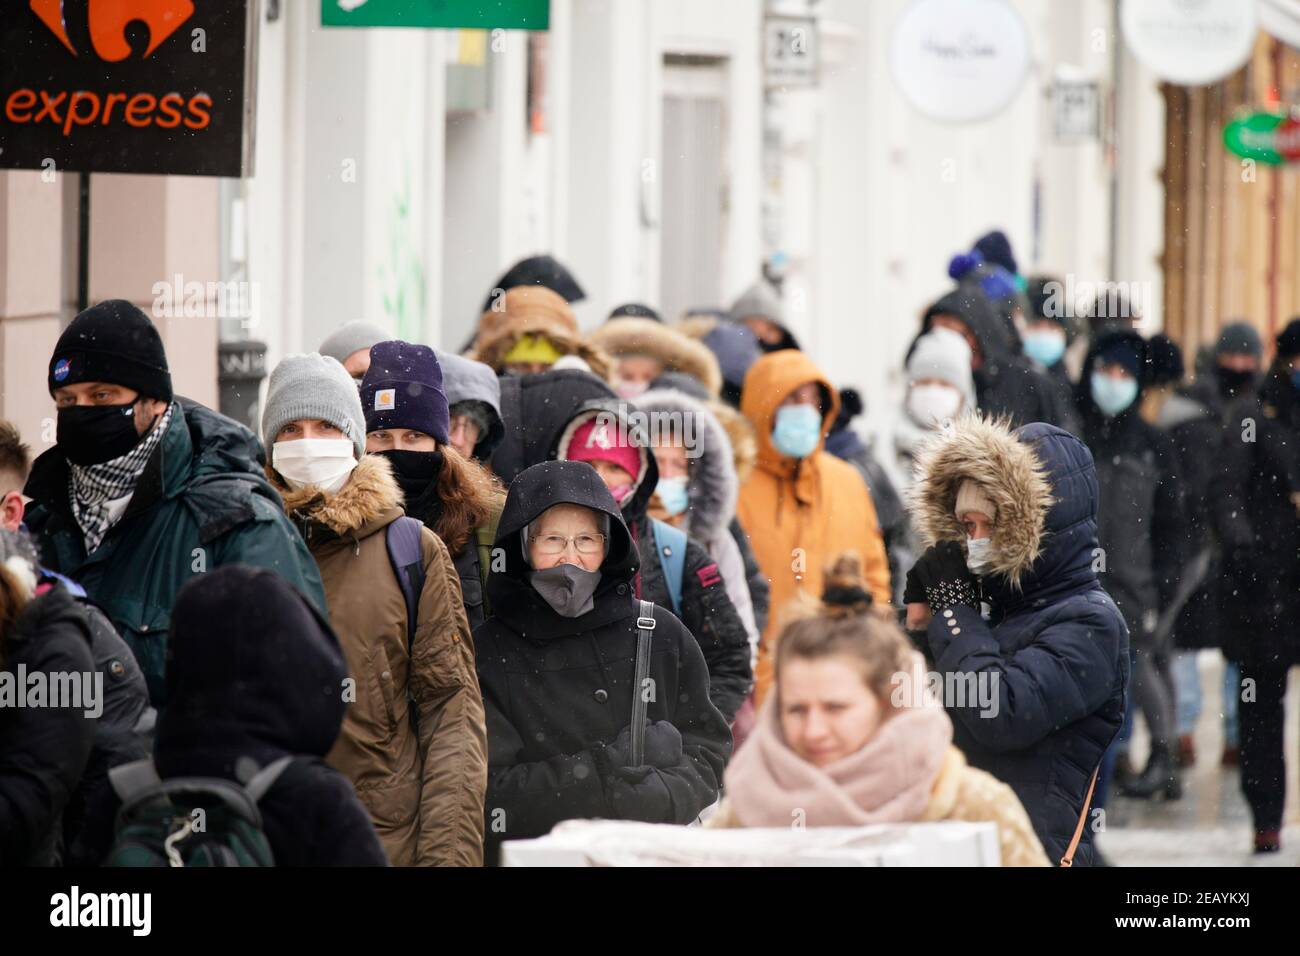 People are seen waiting in line to buy paczki, Polish donuts on Fat Thursday in Warsaw, Poland on February 11, 2021. (Photo by Jaap Arriens / Sipa USA) Stock Photo